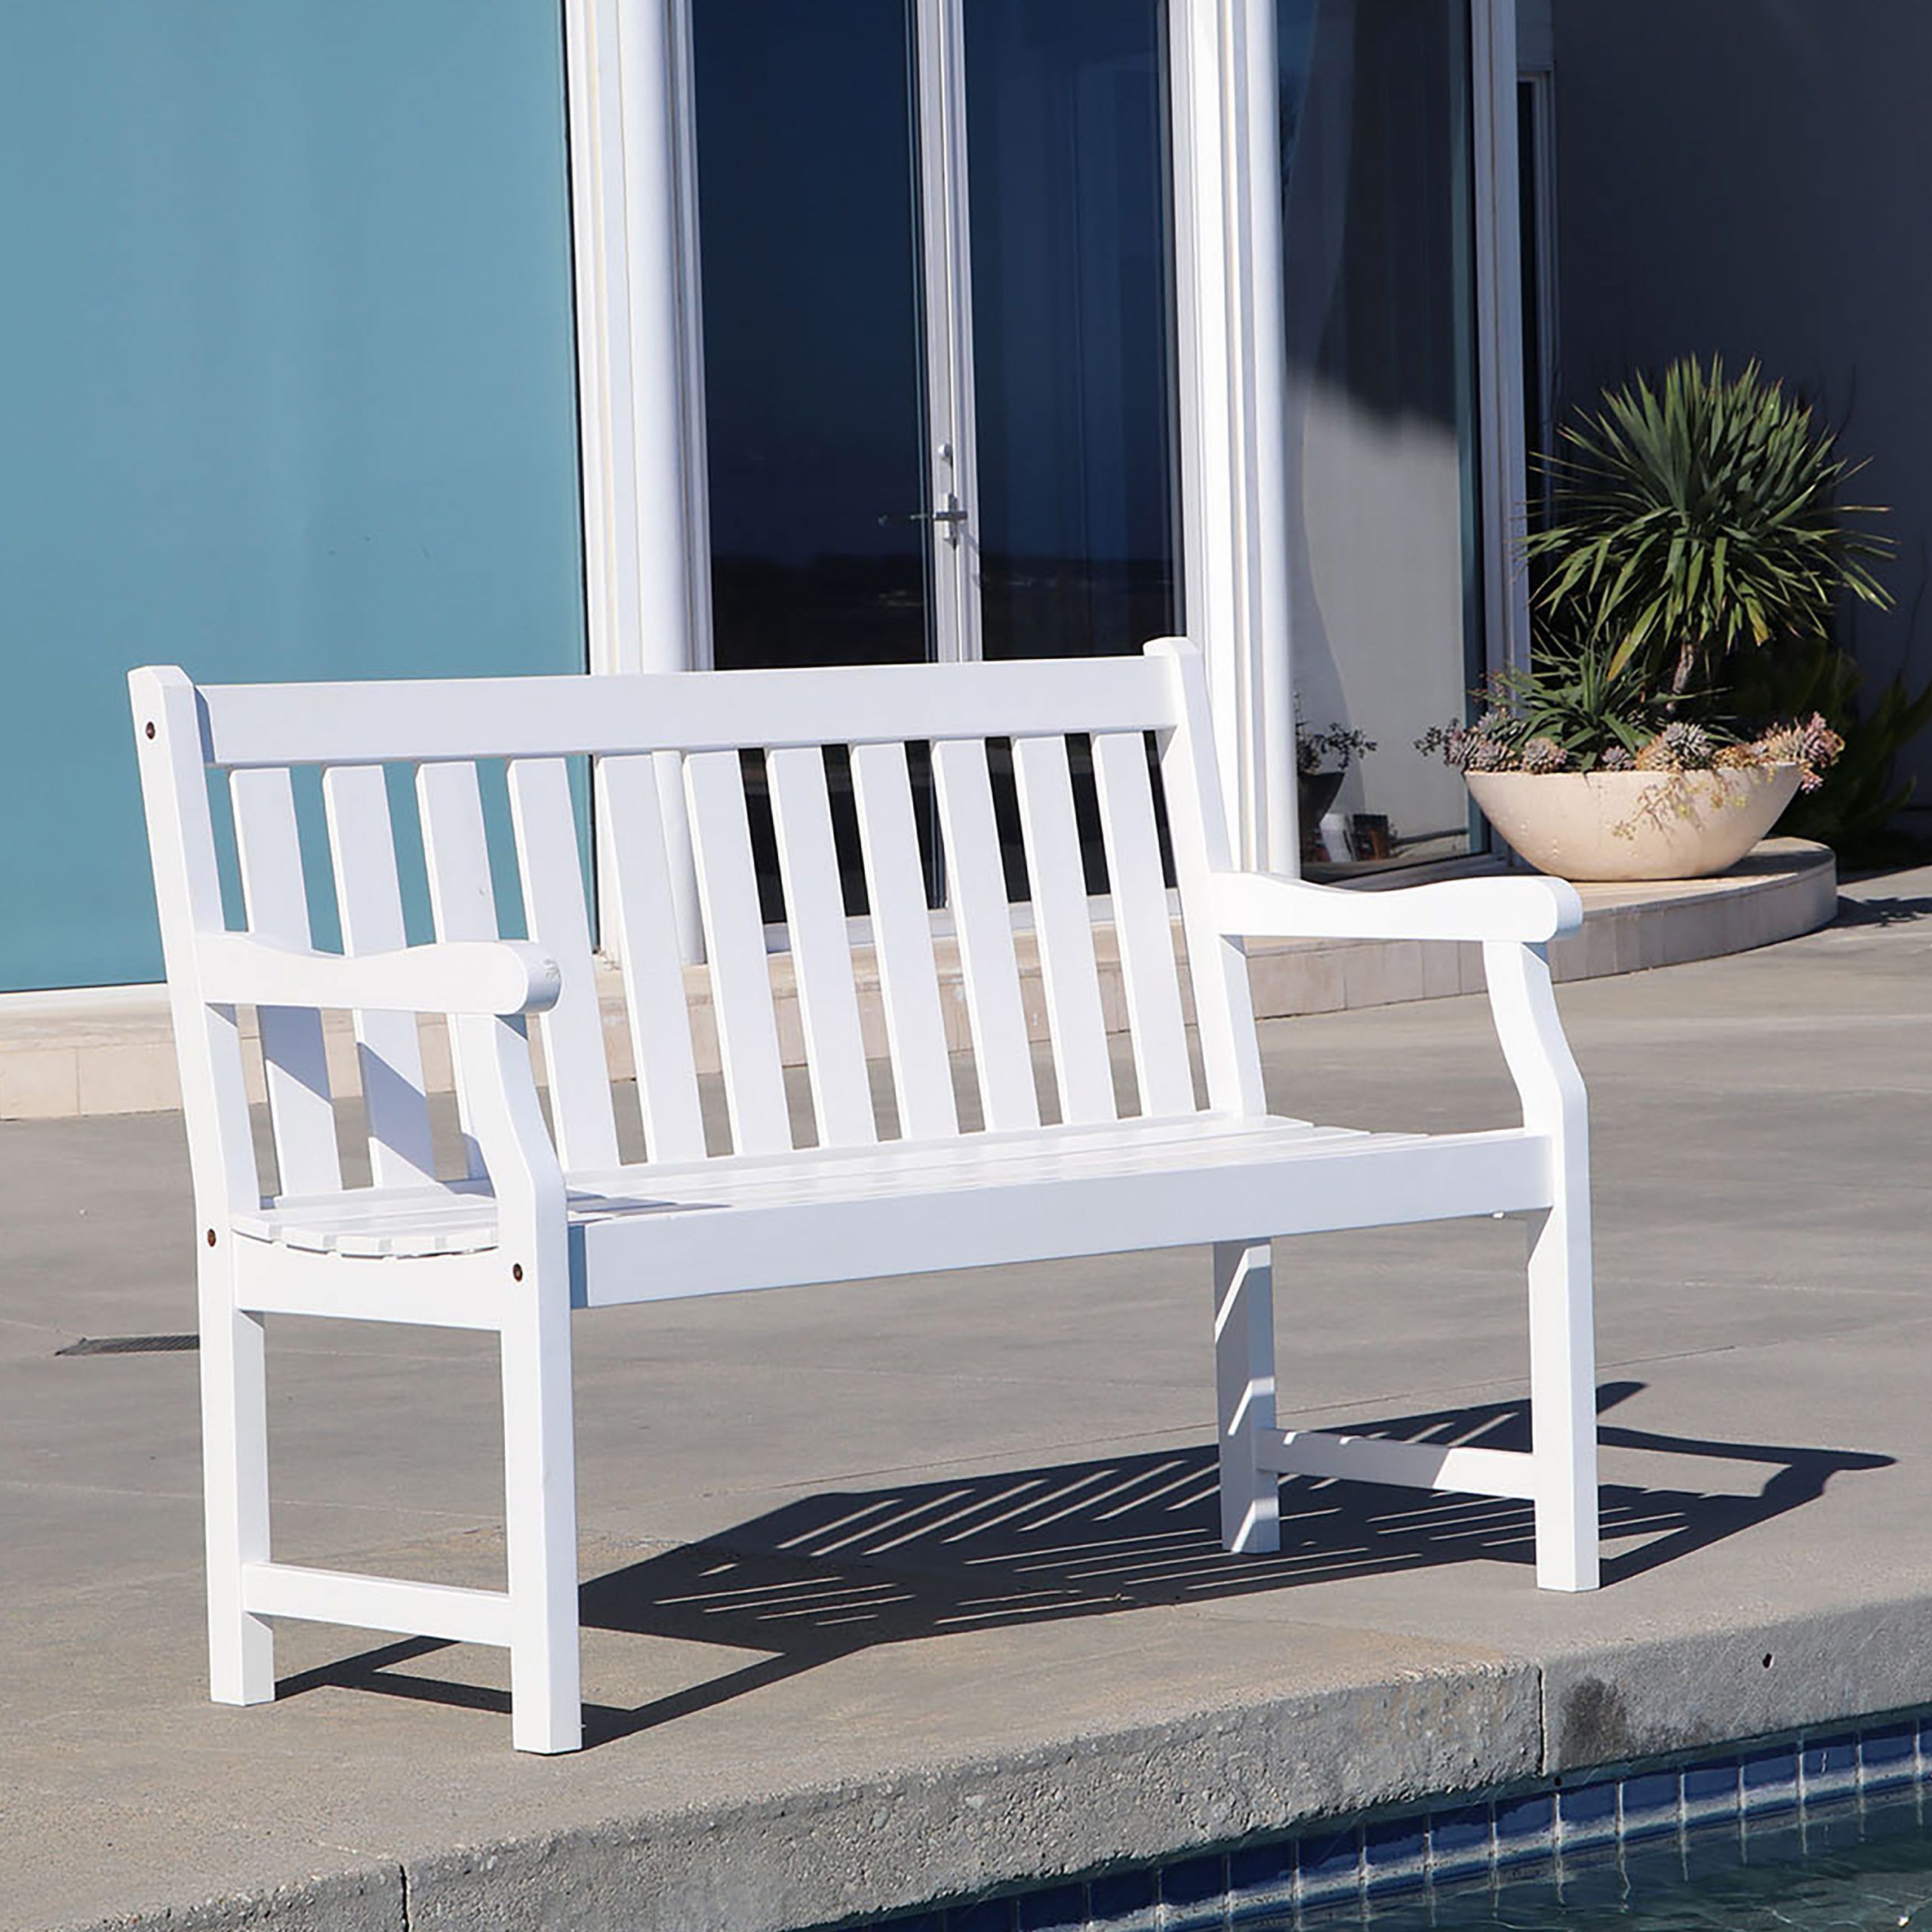 Best And Newest Bradley Eco Friendly 4 Foot Outdoor White Wood Garden Bench – Walmart Regarding White Wood Soutdoor Seating Sets (View 2 of 15)